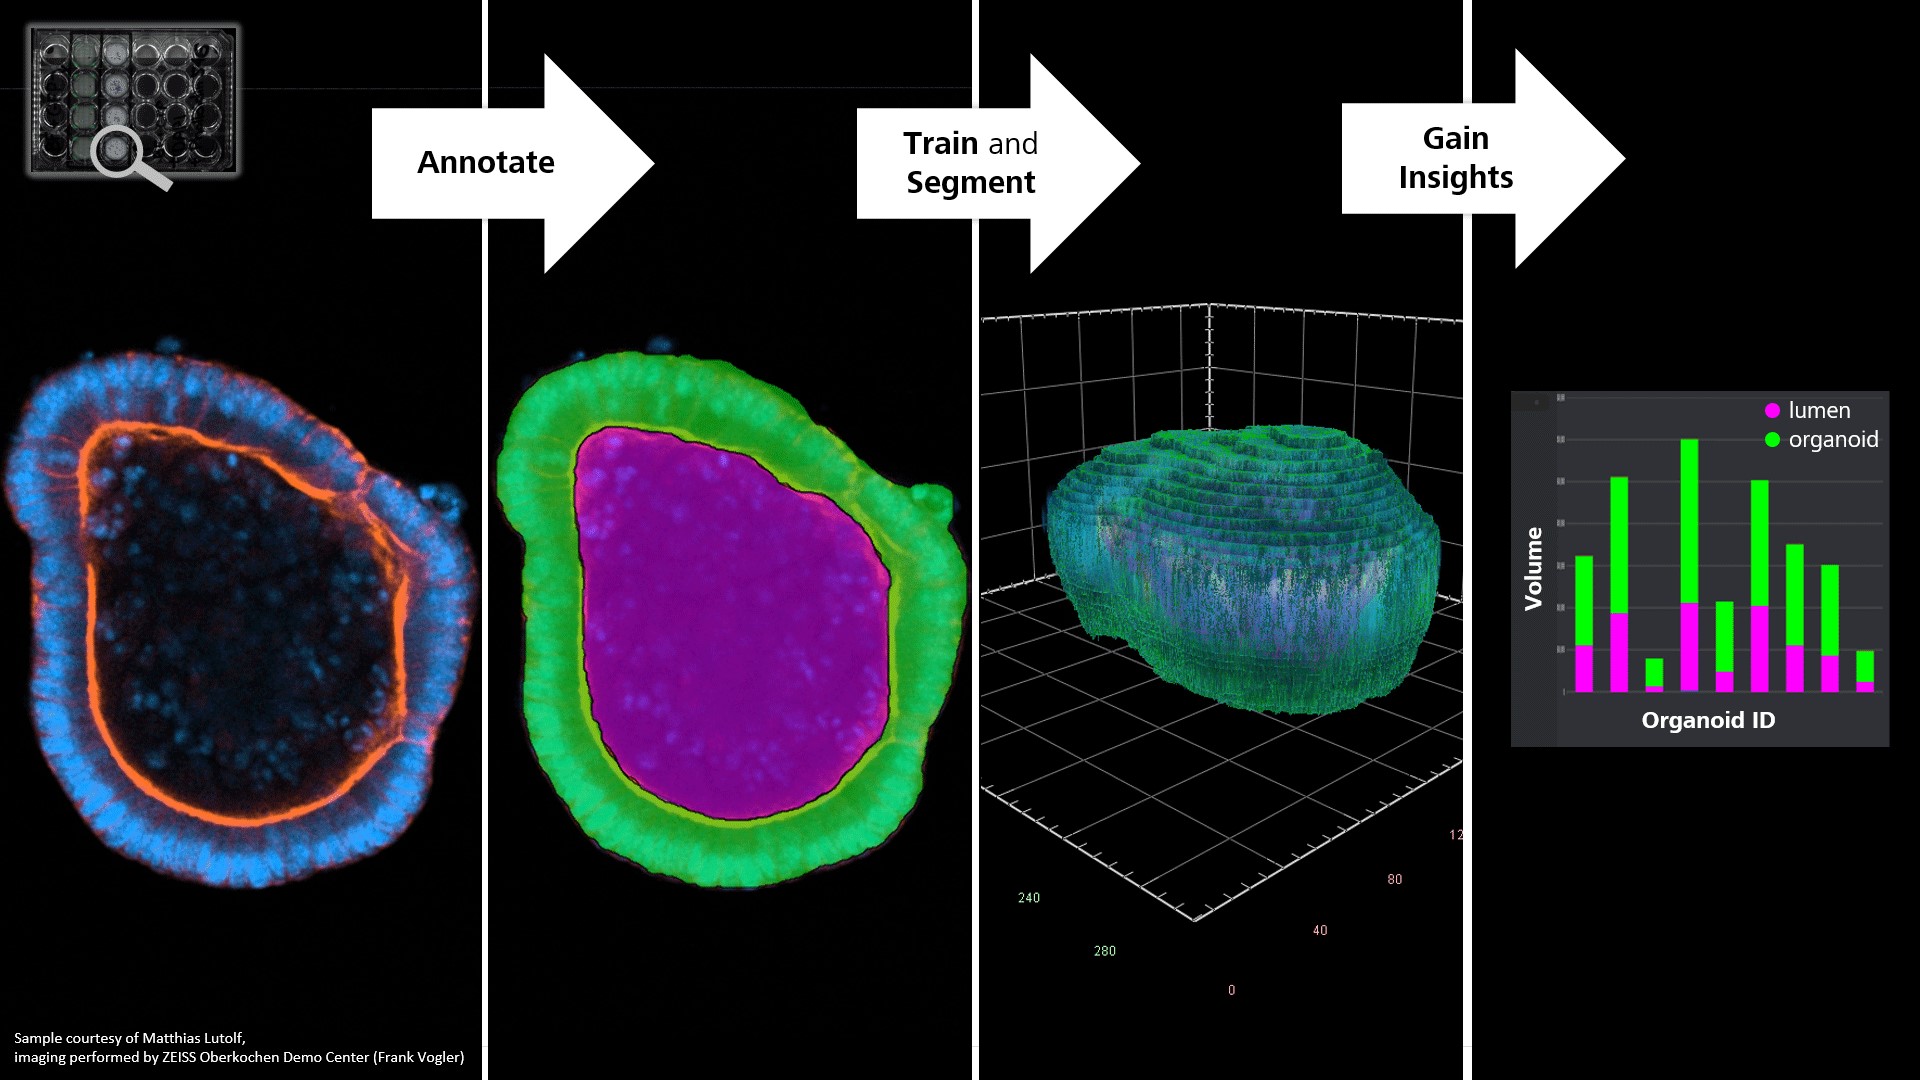 Organoid image analysis with AI for reproducible results